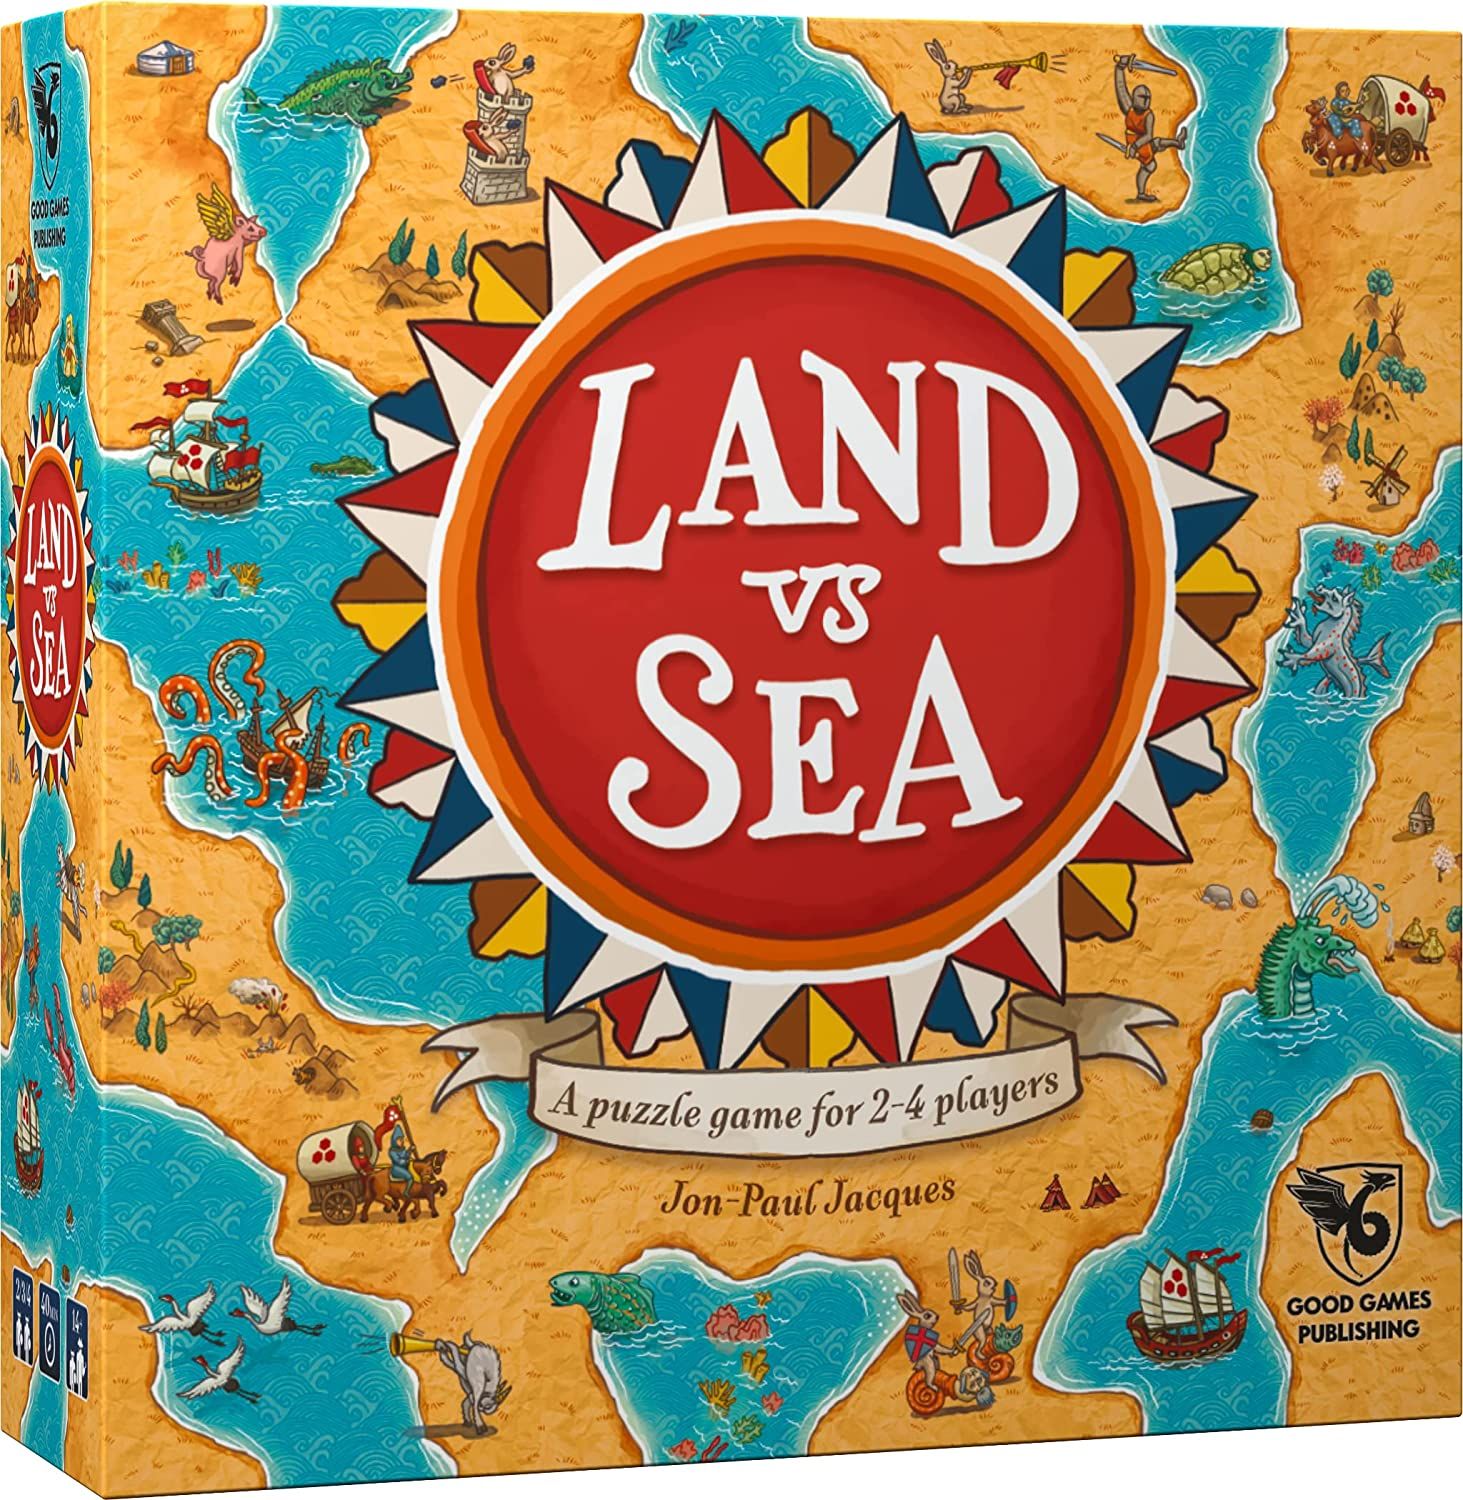 The Land Vs Sea game box features a giant logo of the game title and a game-style map.